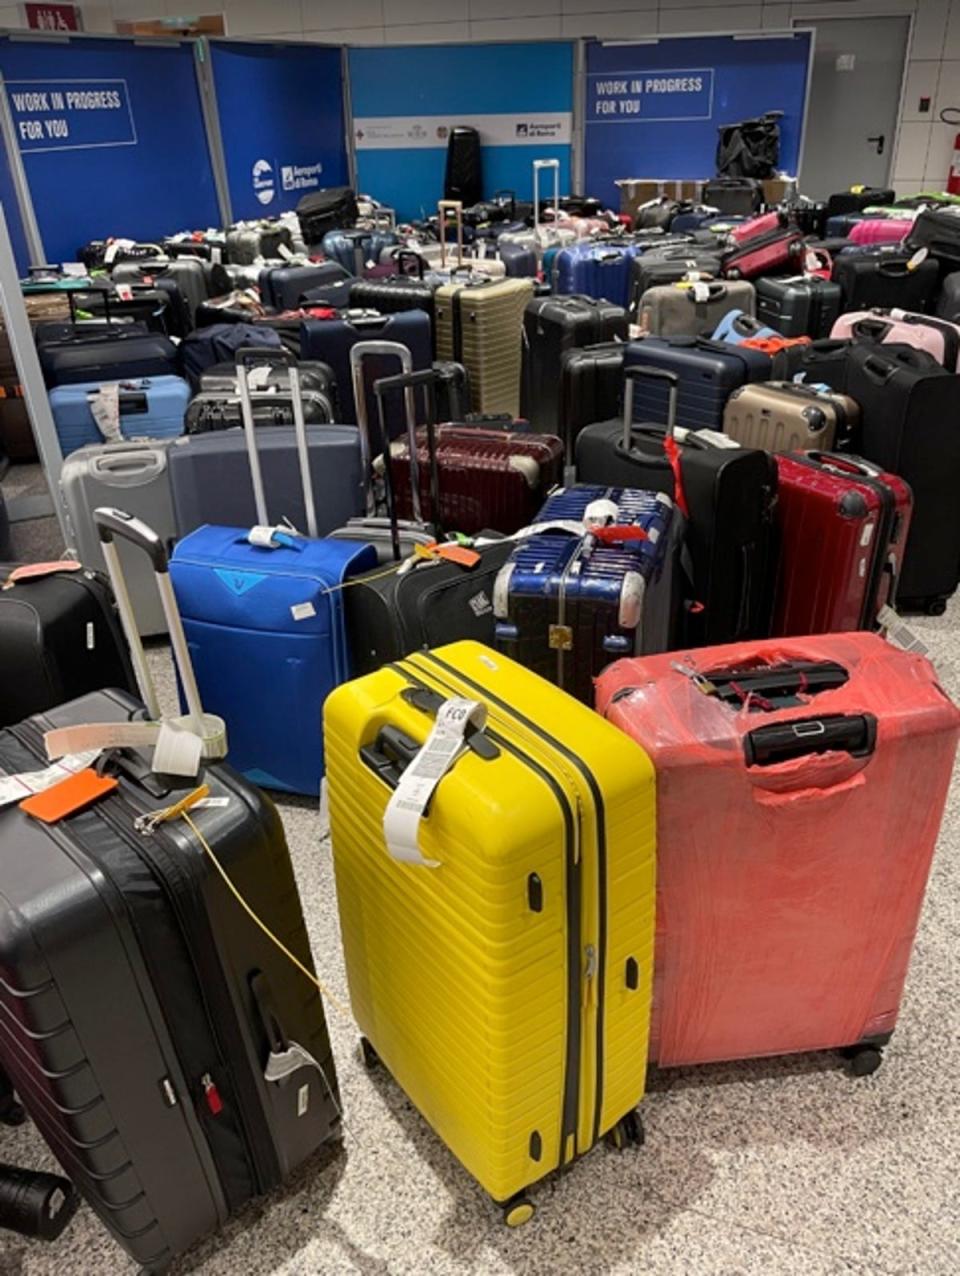 Lisa Khan’s luggage among a pile of lost bags at Florence Airport (Courtesy of Lisa Khan)